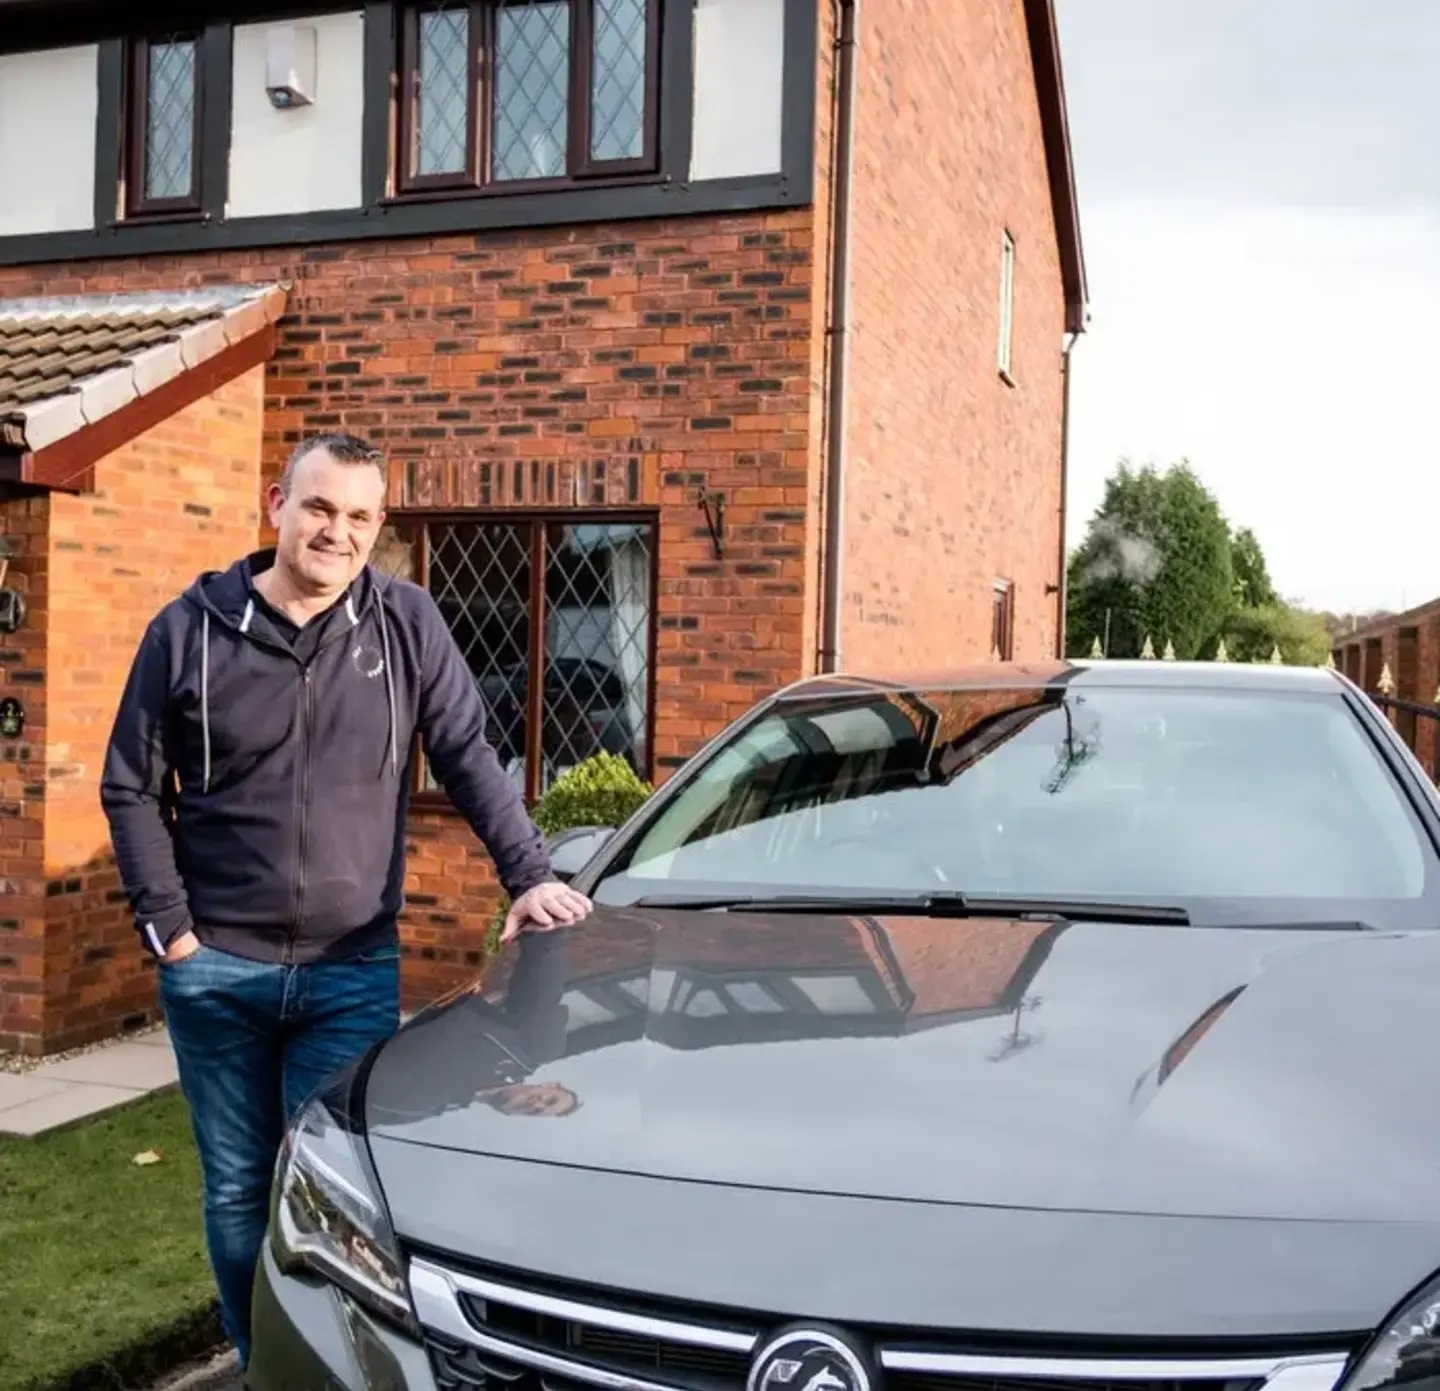 Barry standing, facing the camera and smiling, next to the front of his silver car. Pictured in the background is a house.